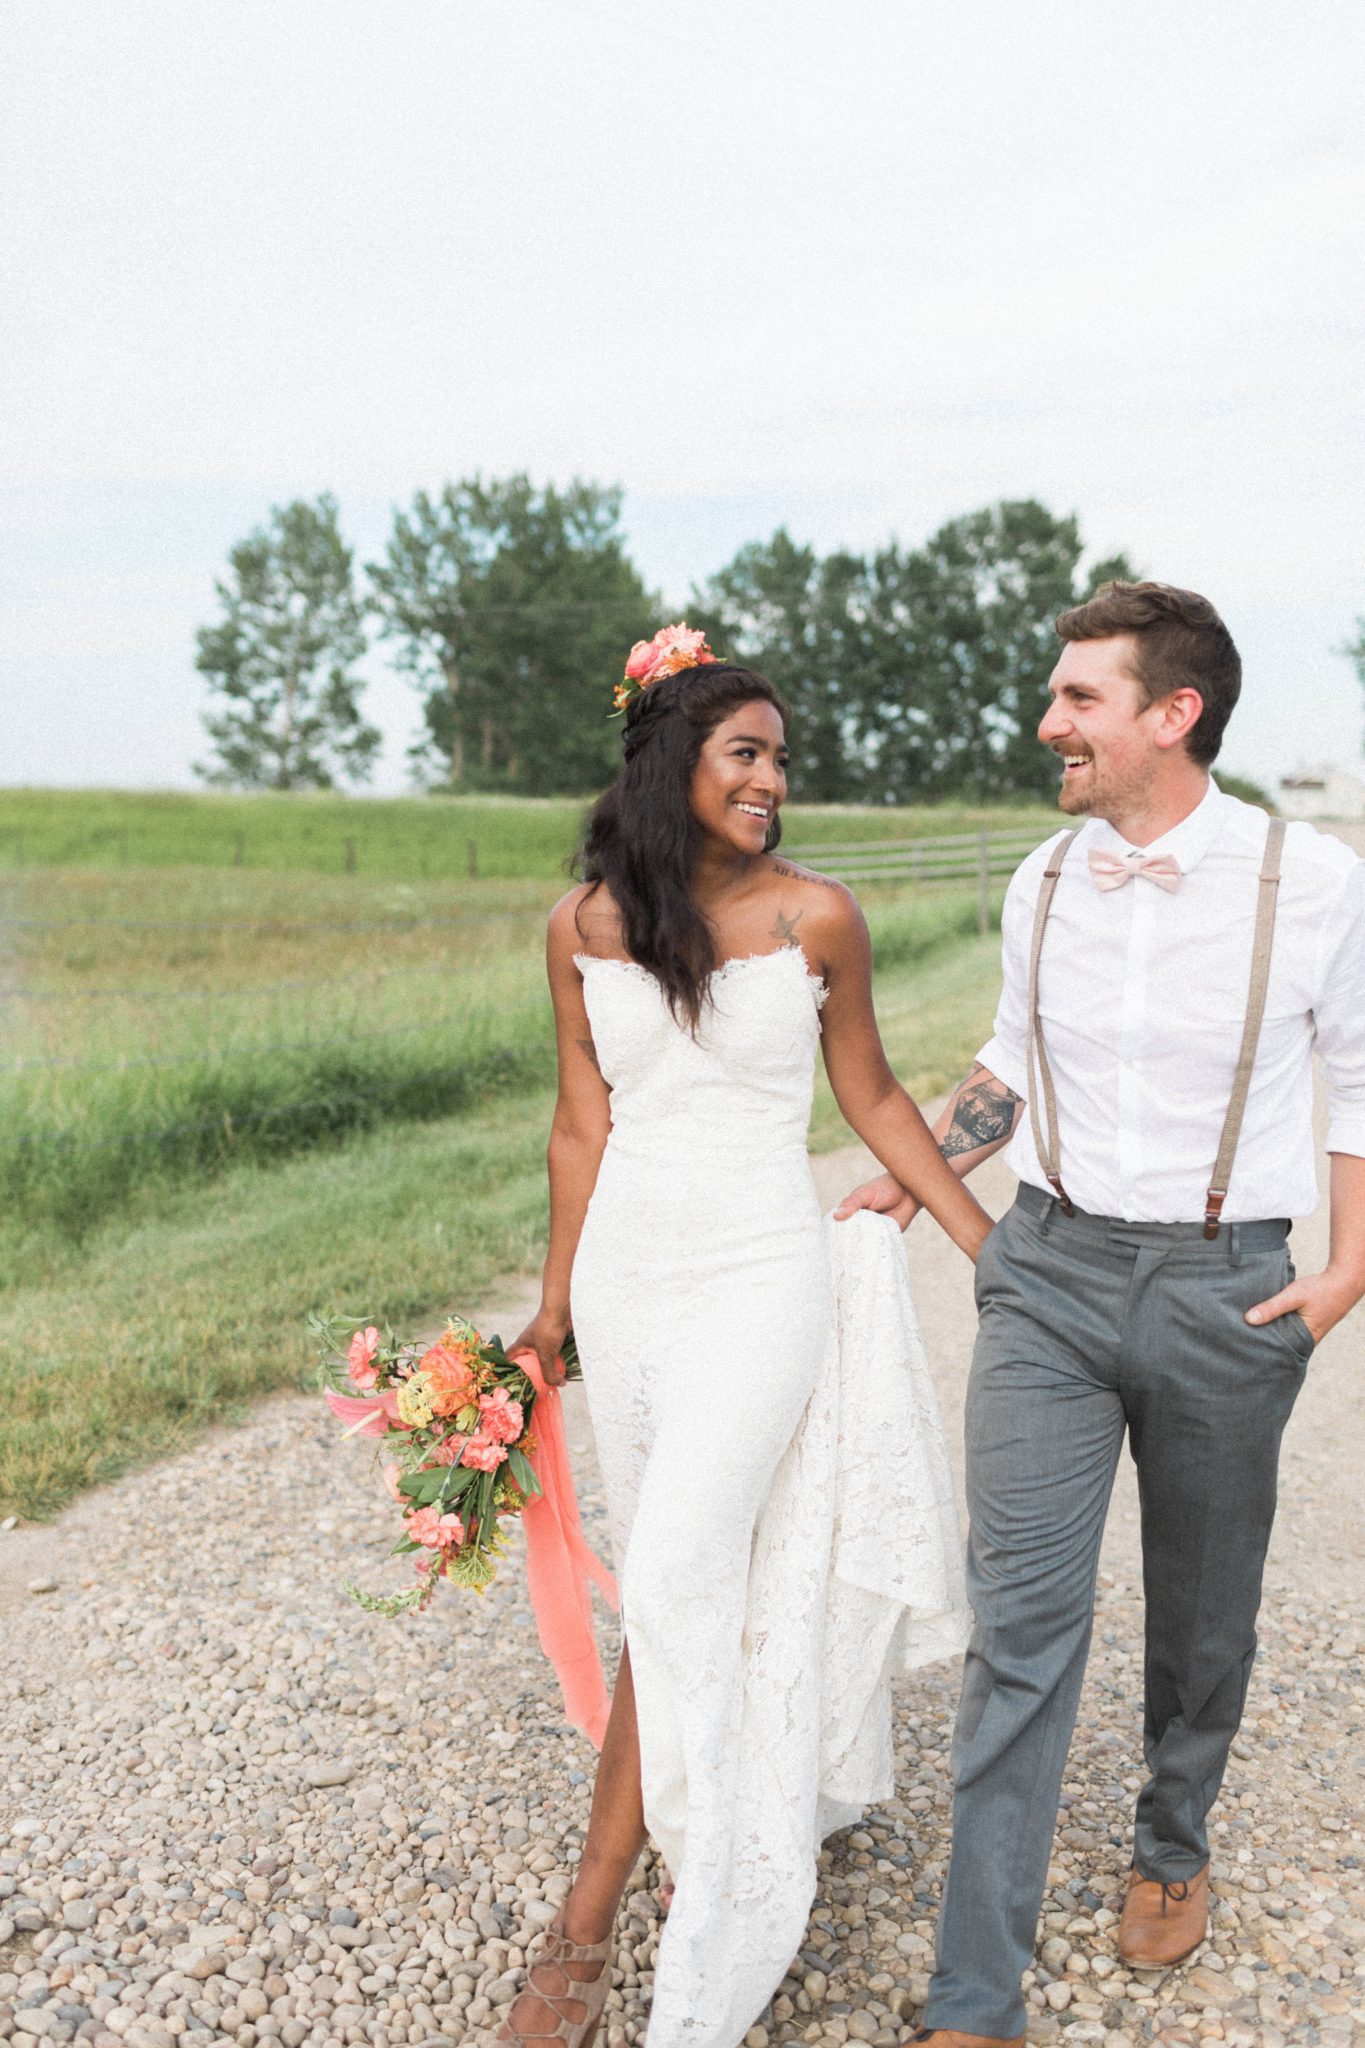 Bride and groom walk down a country road on their wedding day with pink and tangerine flowers